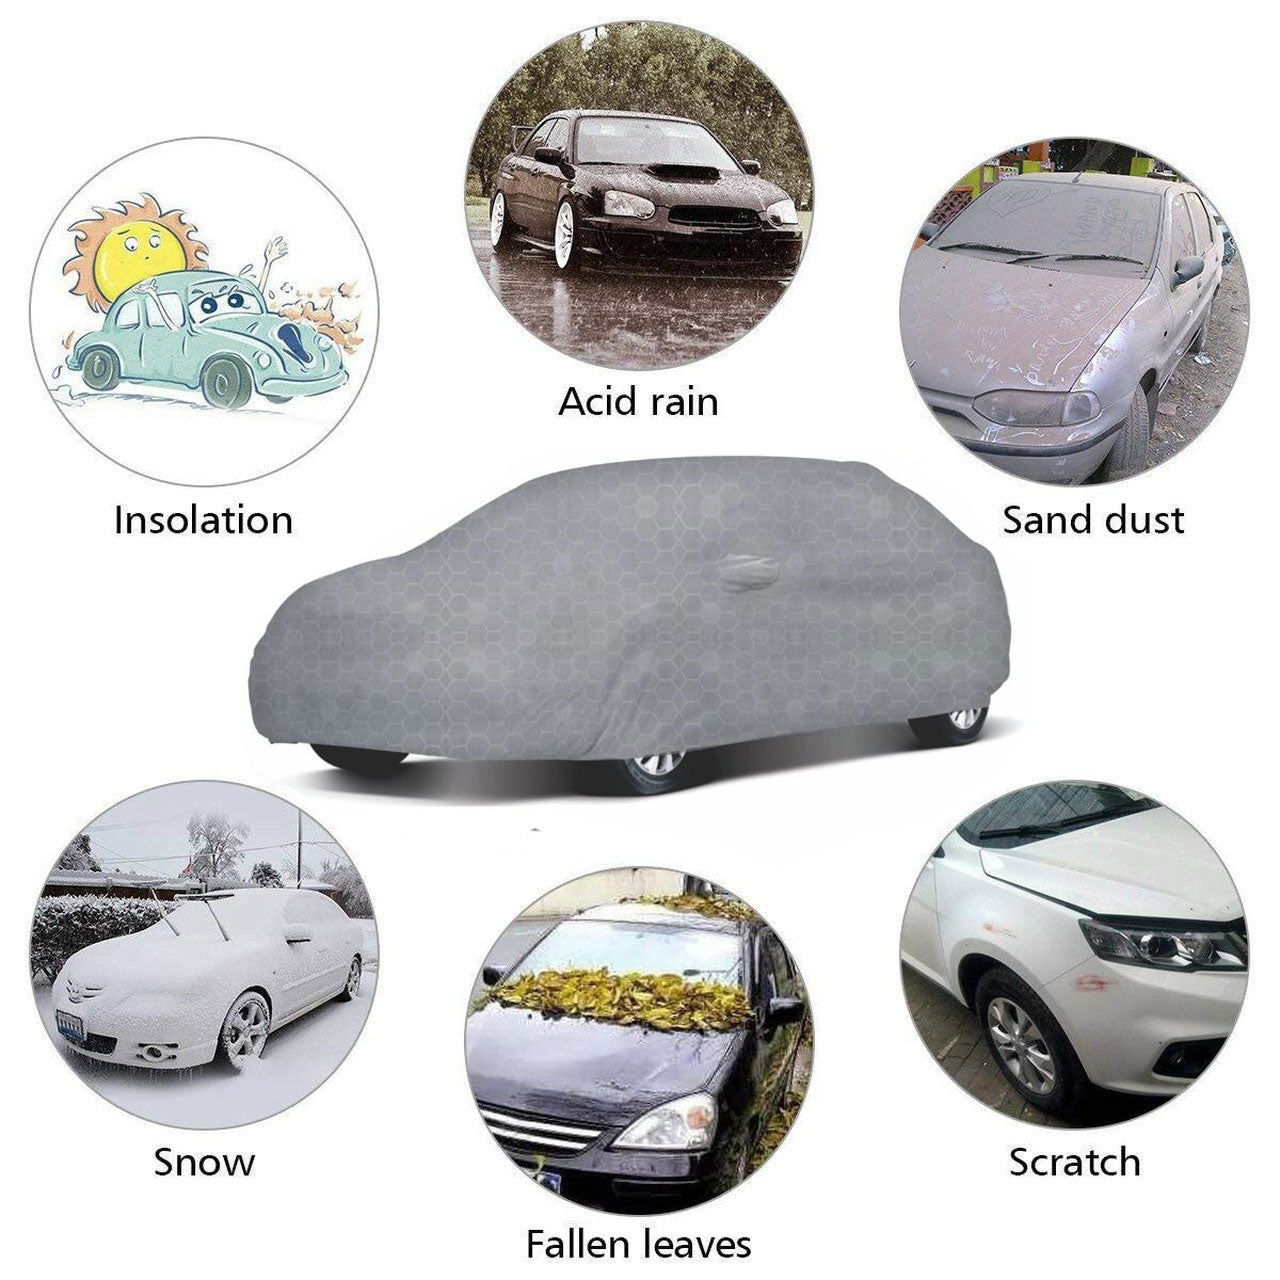 Oshotto 100% Dust Proof, Water Resistant Grey Car Body Cover with Mirror Pocket For Maruti Suzuki XL6